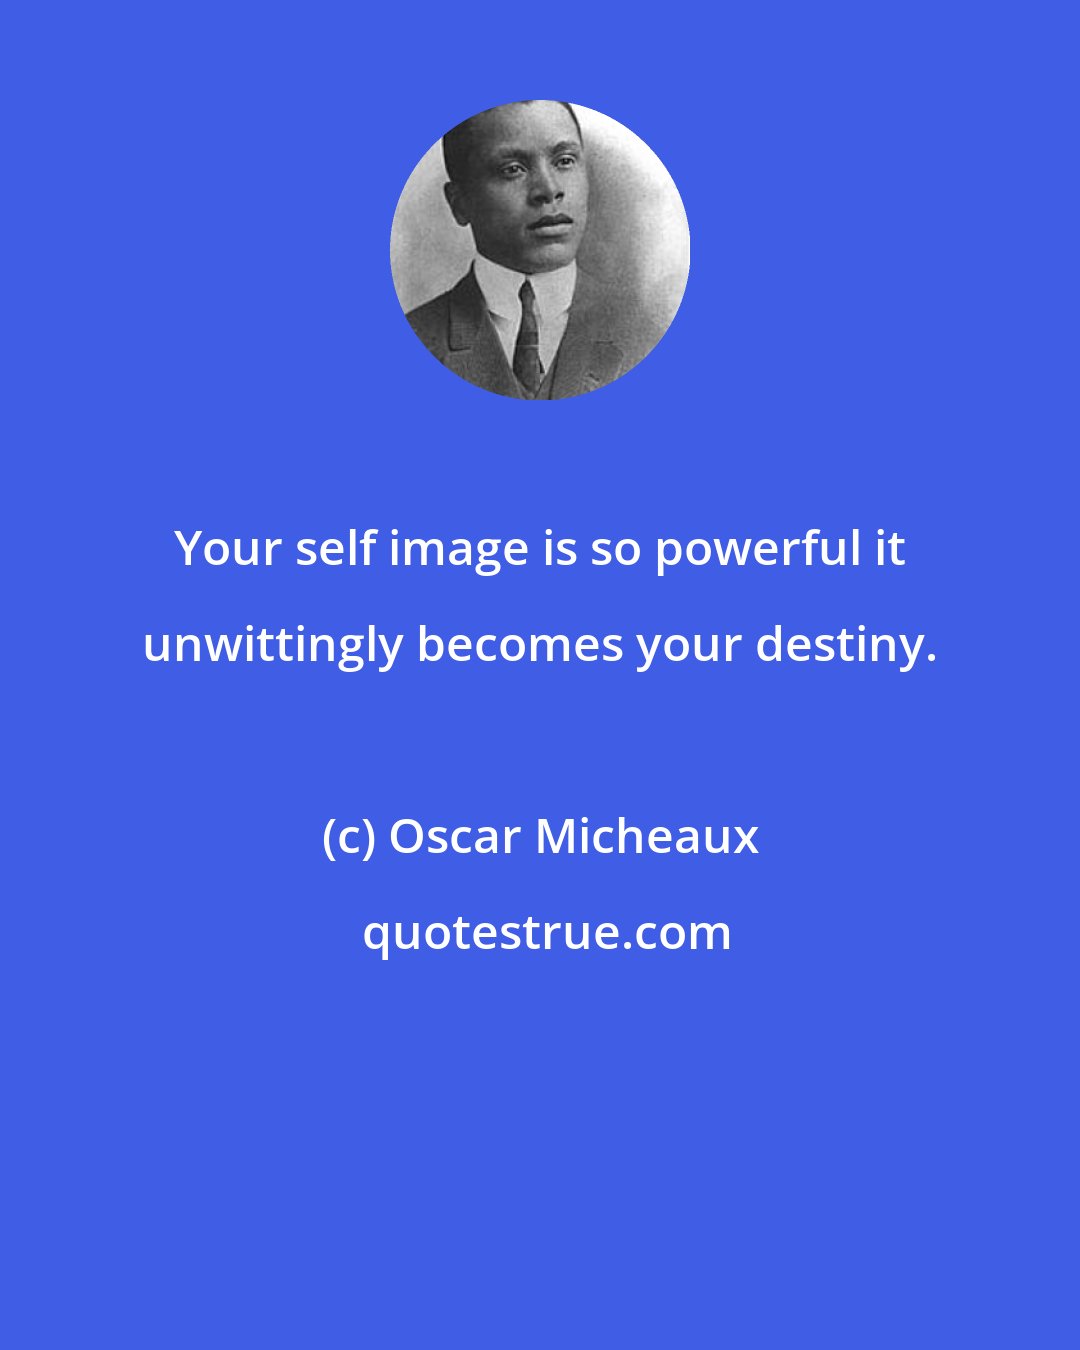 Oscar Micheaux: Your self image is so powerful it unwittingly becomes your destiny.